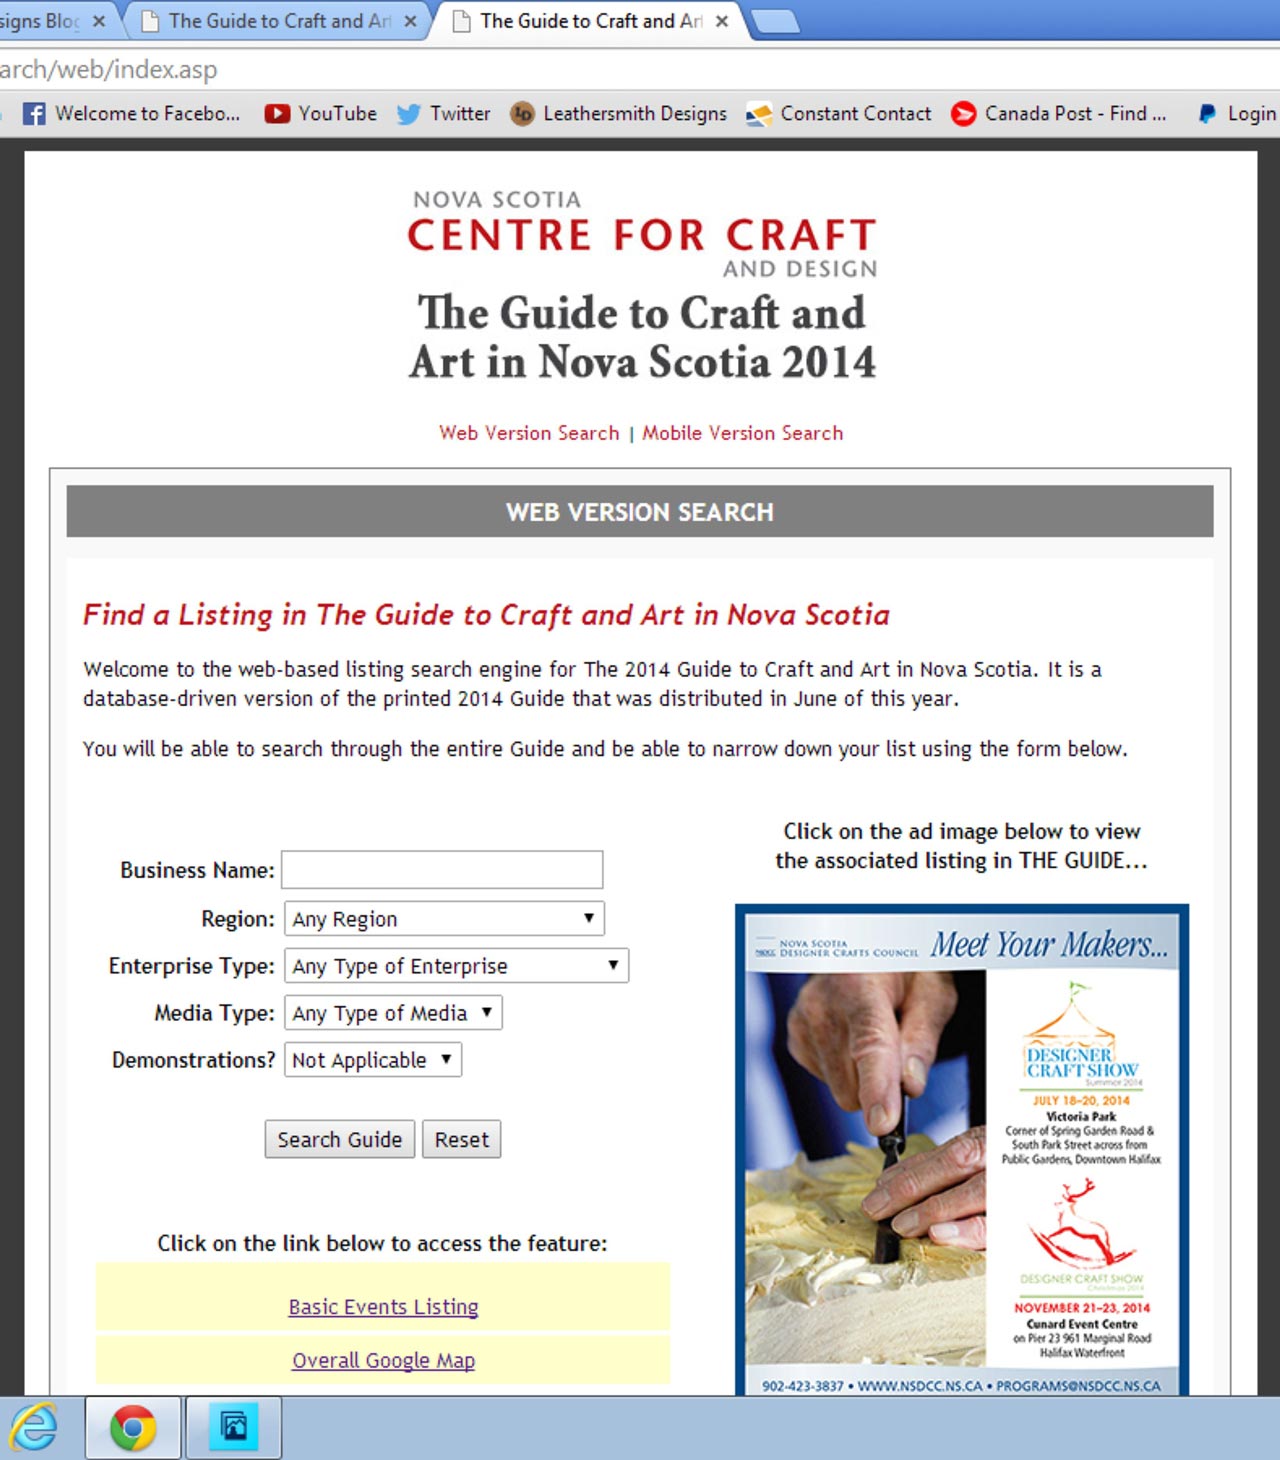 The Guide To Craft & Art